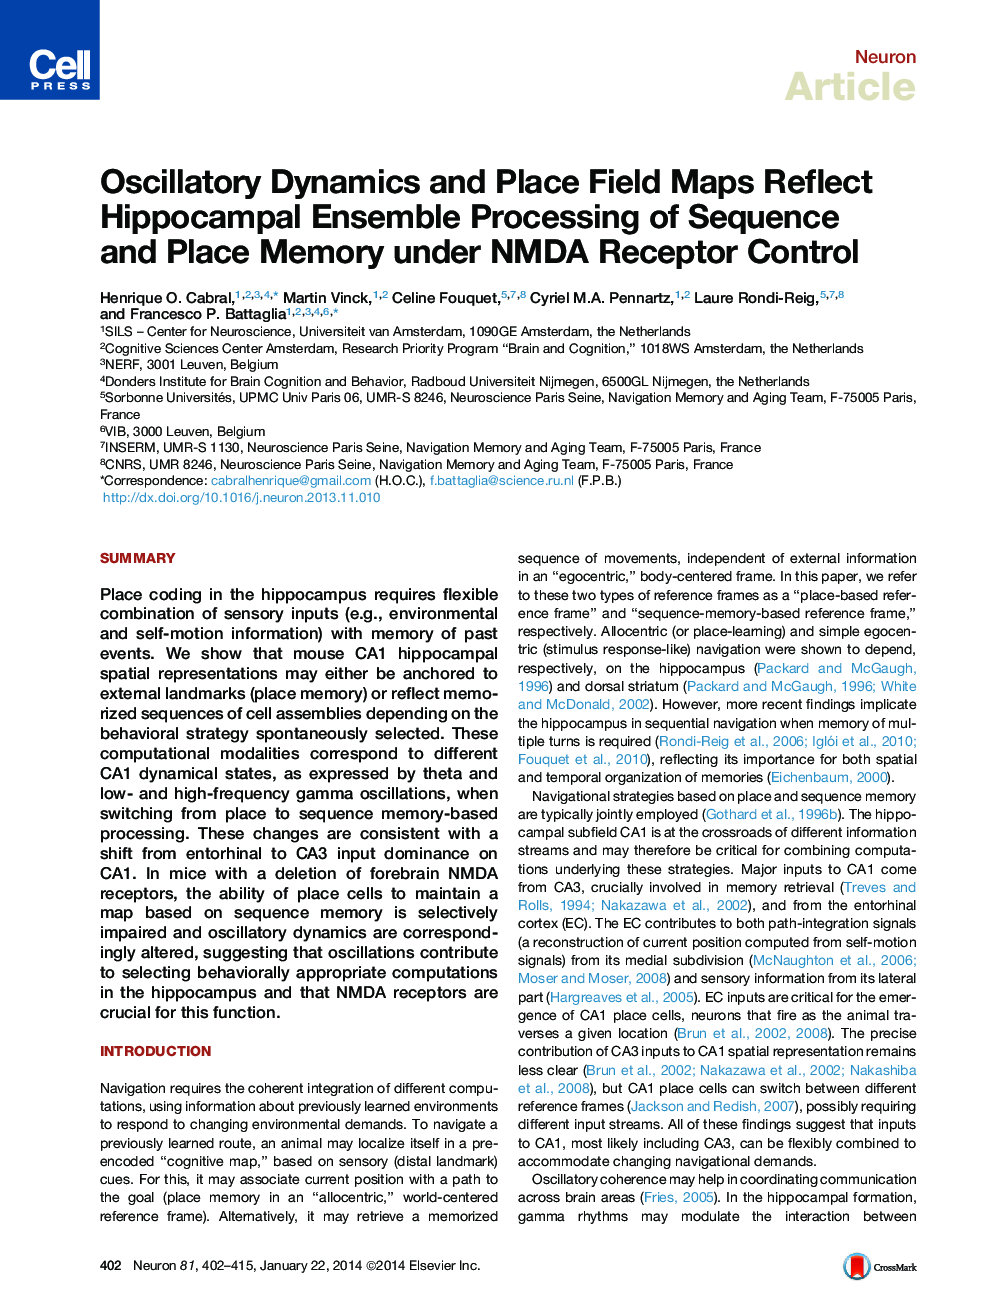 Oscillatory Dynamics and Place Field Maps Reflect Hippocampal Ensemble Processing of Sequence and Place Memory under NMDA Receptor Control